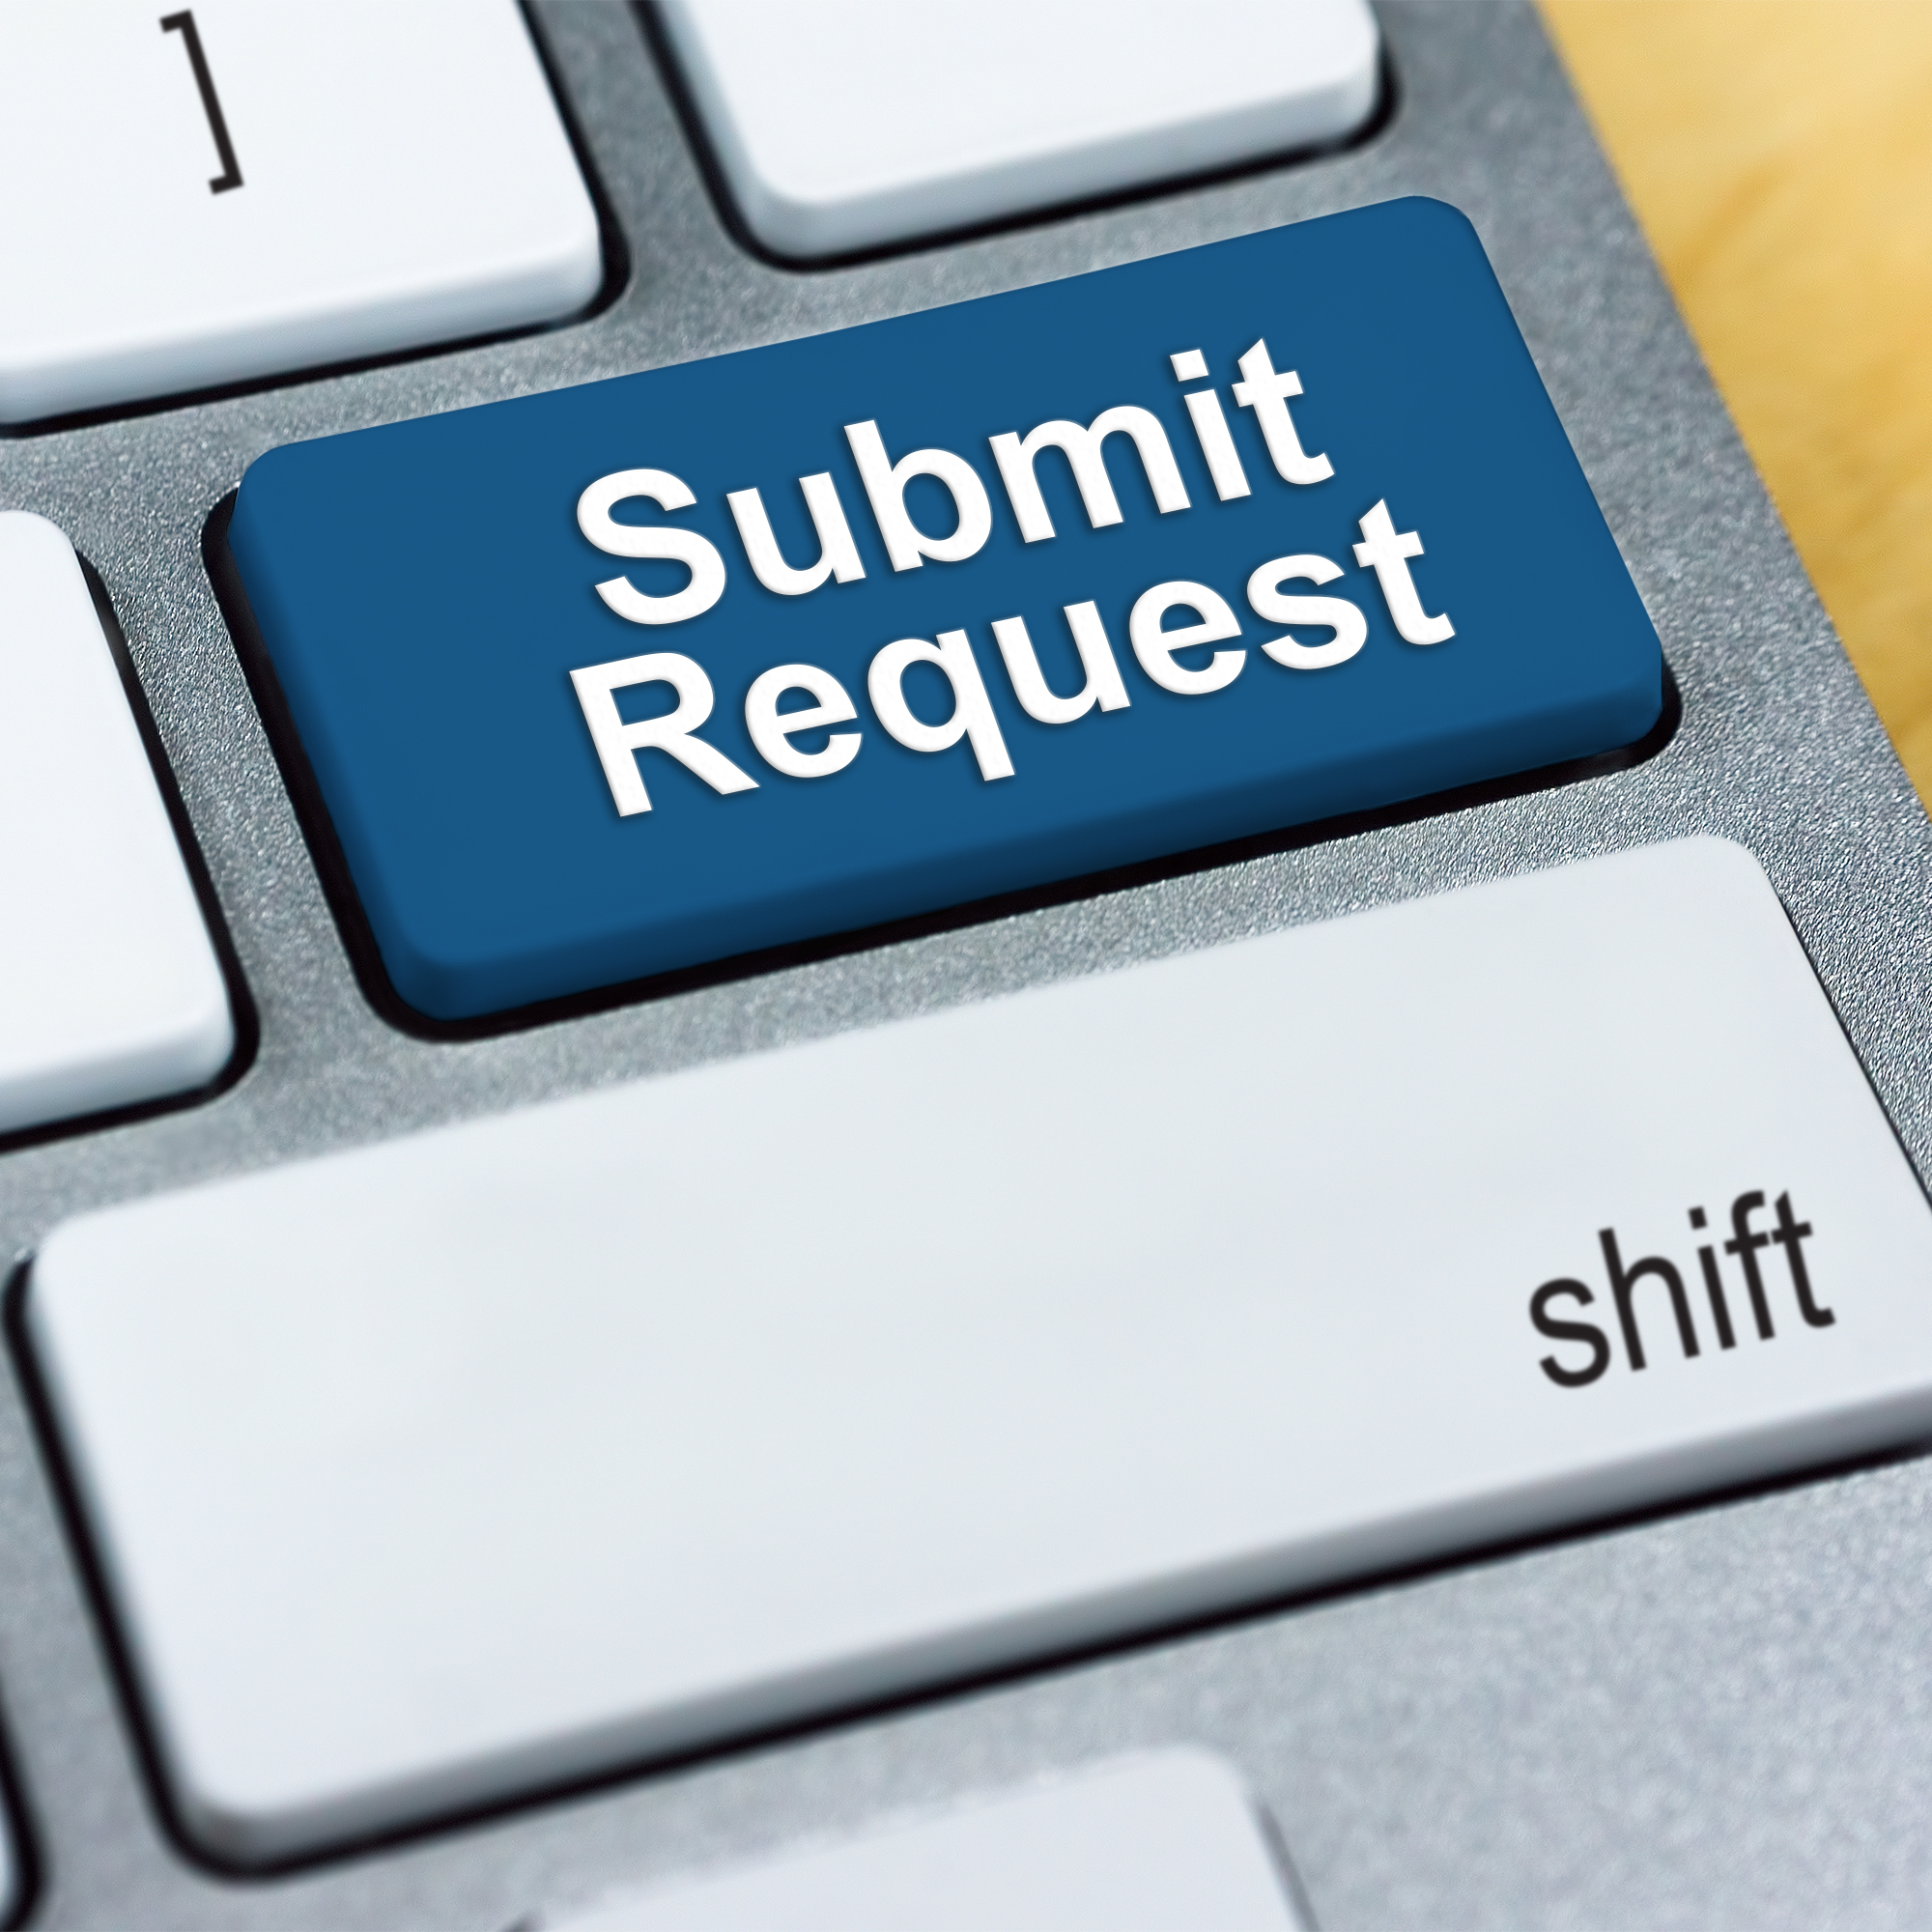 submit request button on keyboard